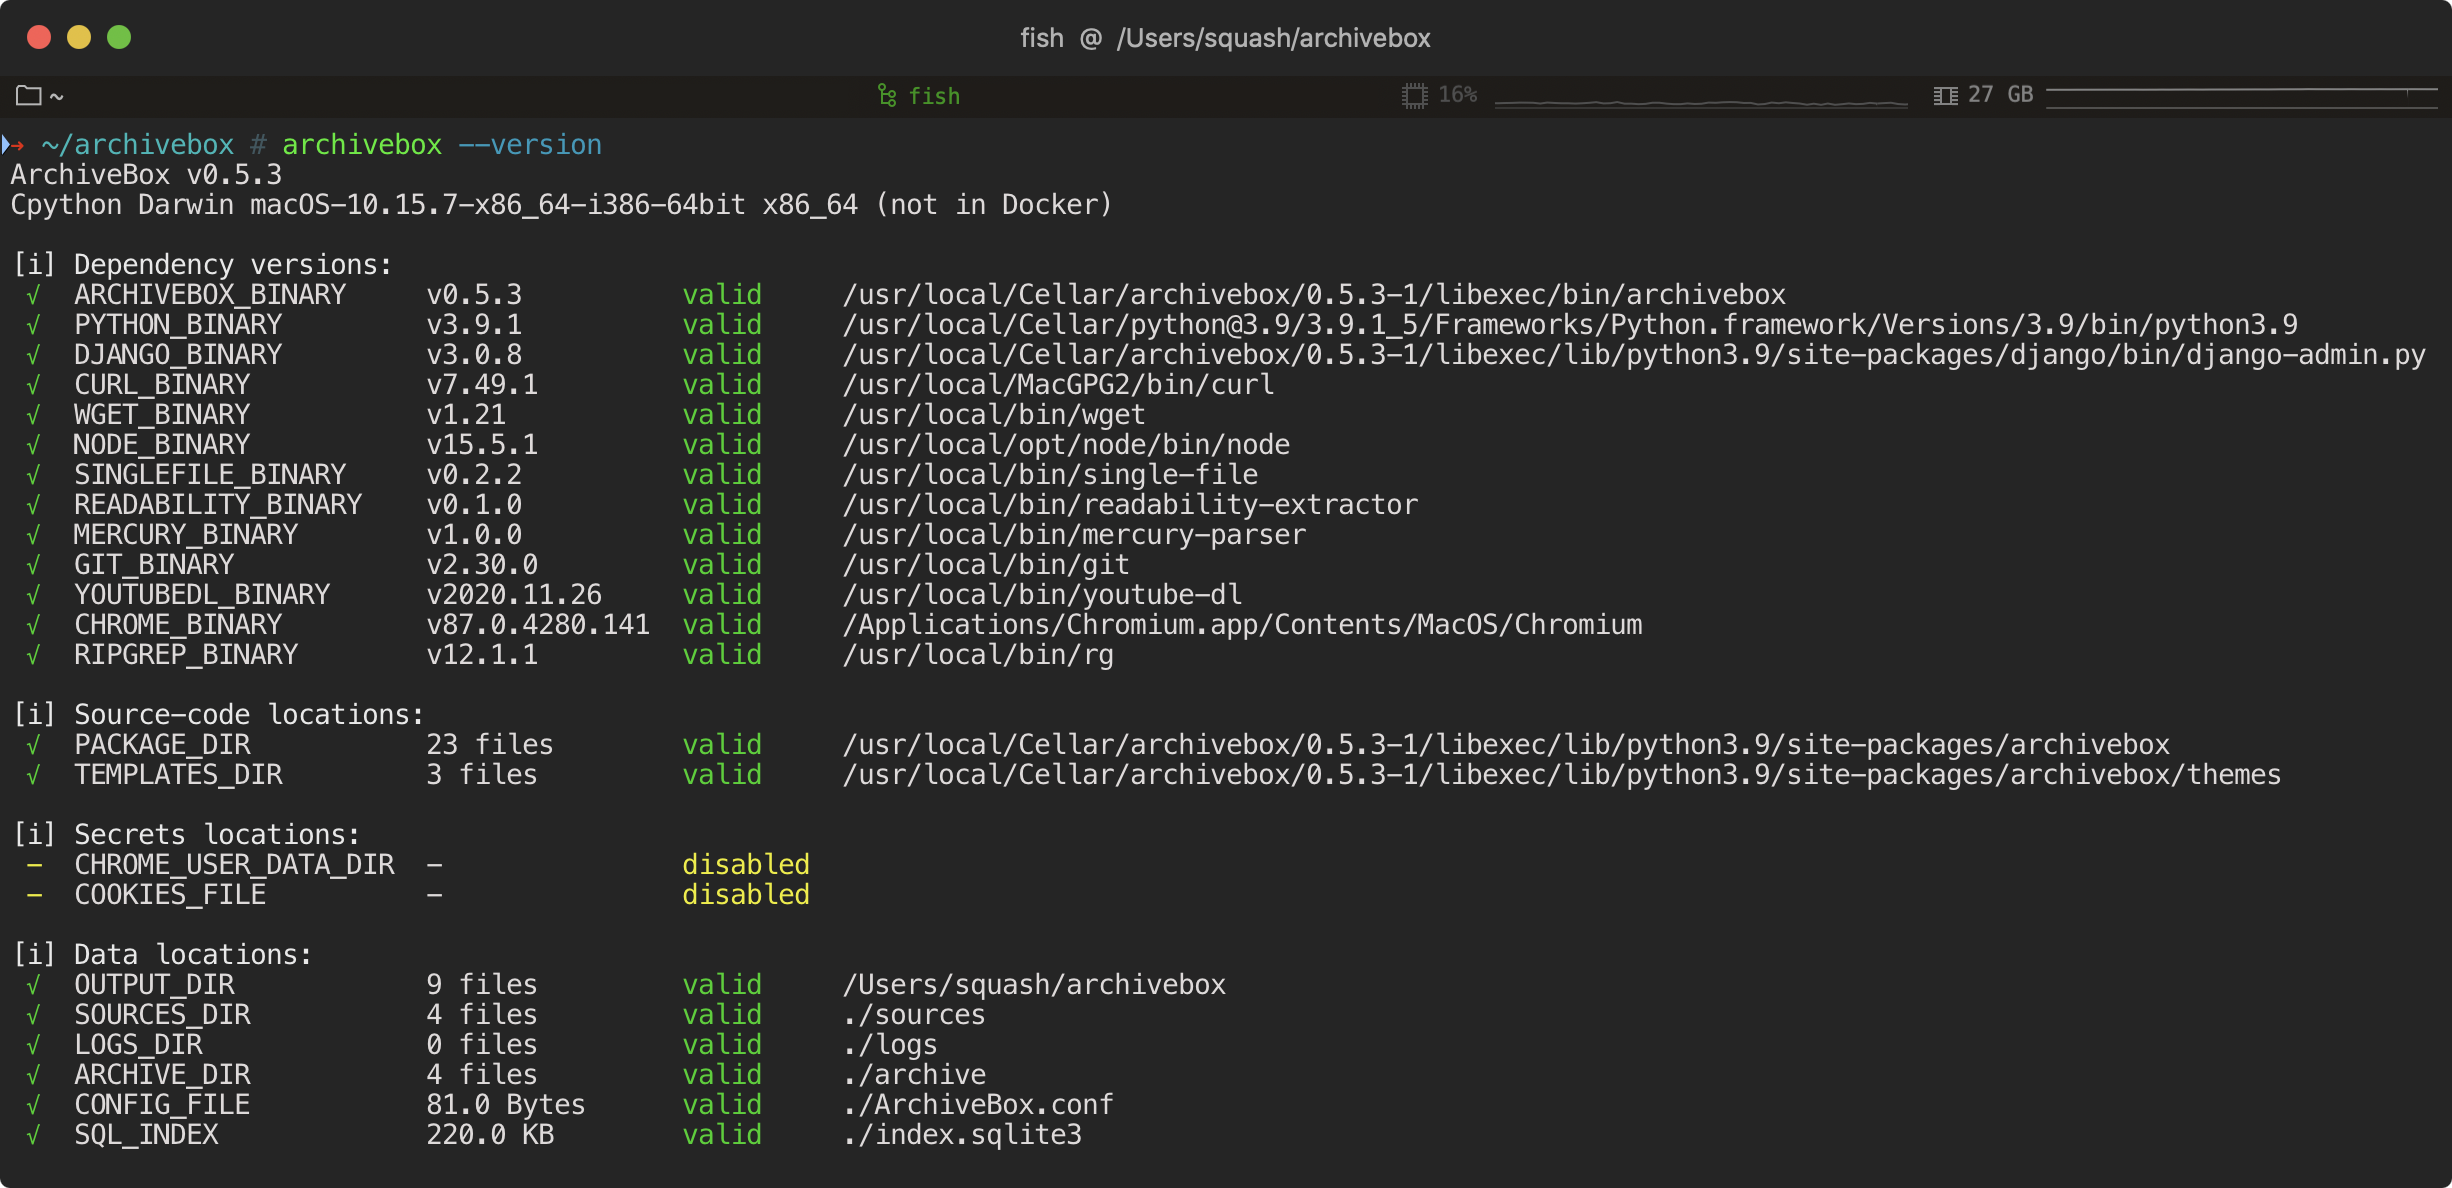 archivebox --version CLI output screenshot showing dependencies installed